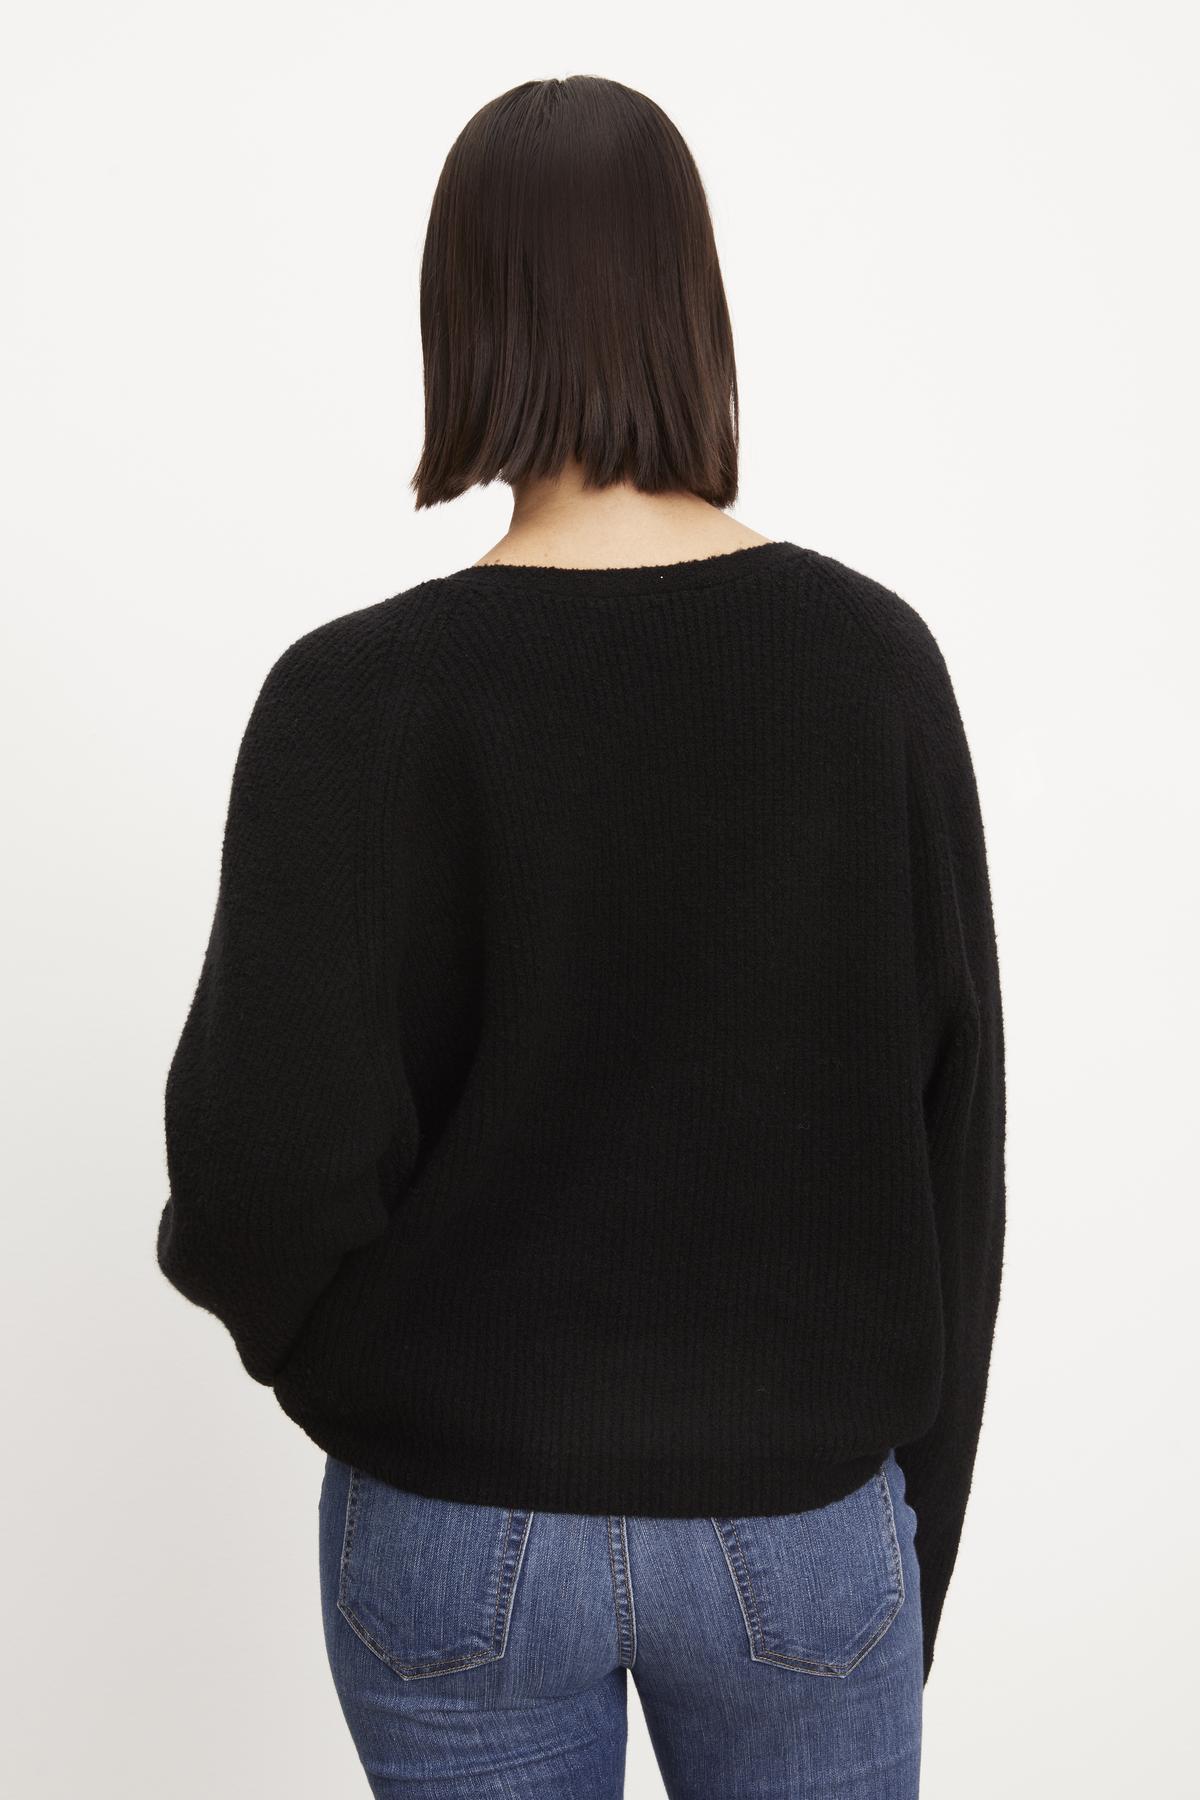 The back view of a woman wearing a Velvet by Graham & Spencer CAITLYN BOUCLE RAGLAN SWEATER with a twist knot detail.-36094304682177